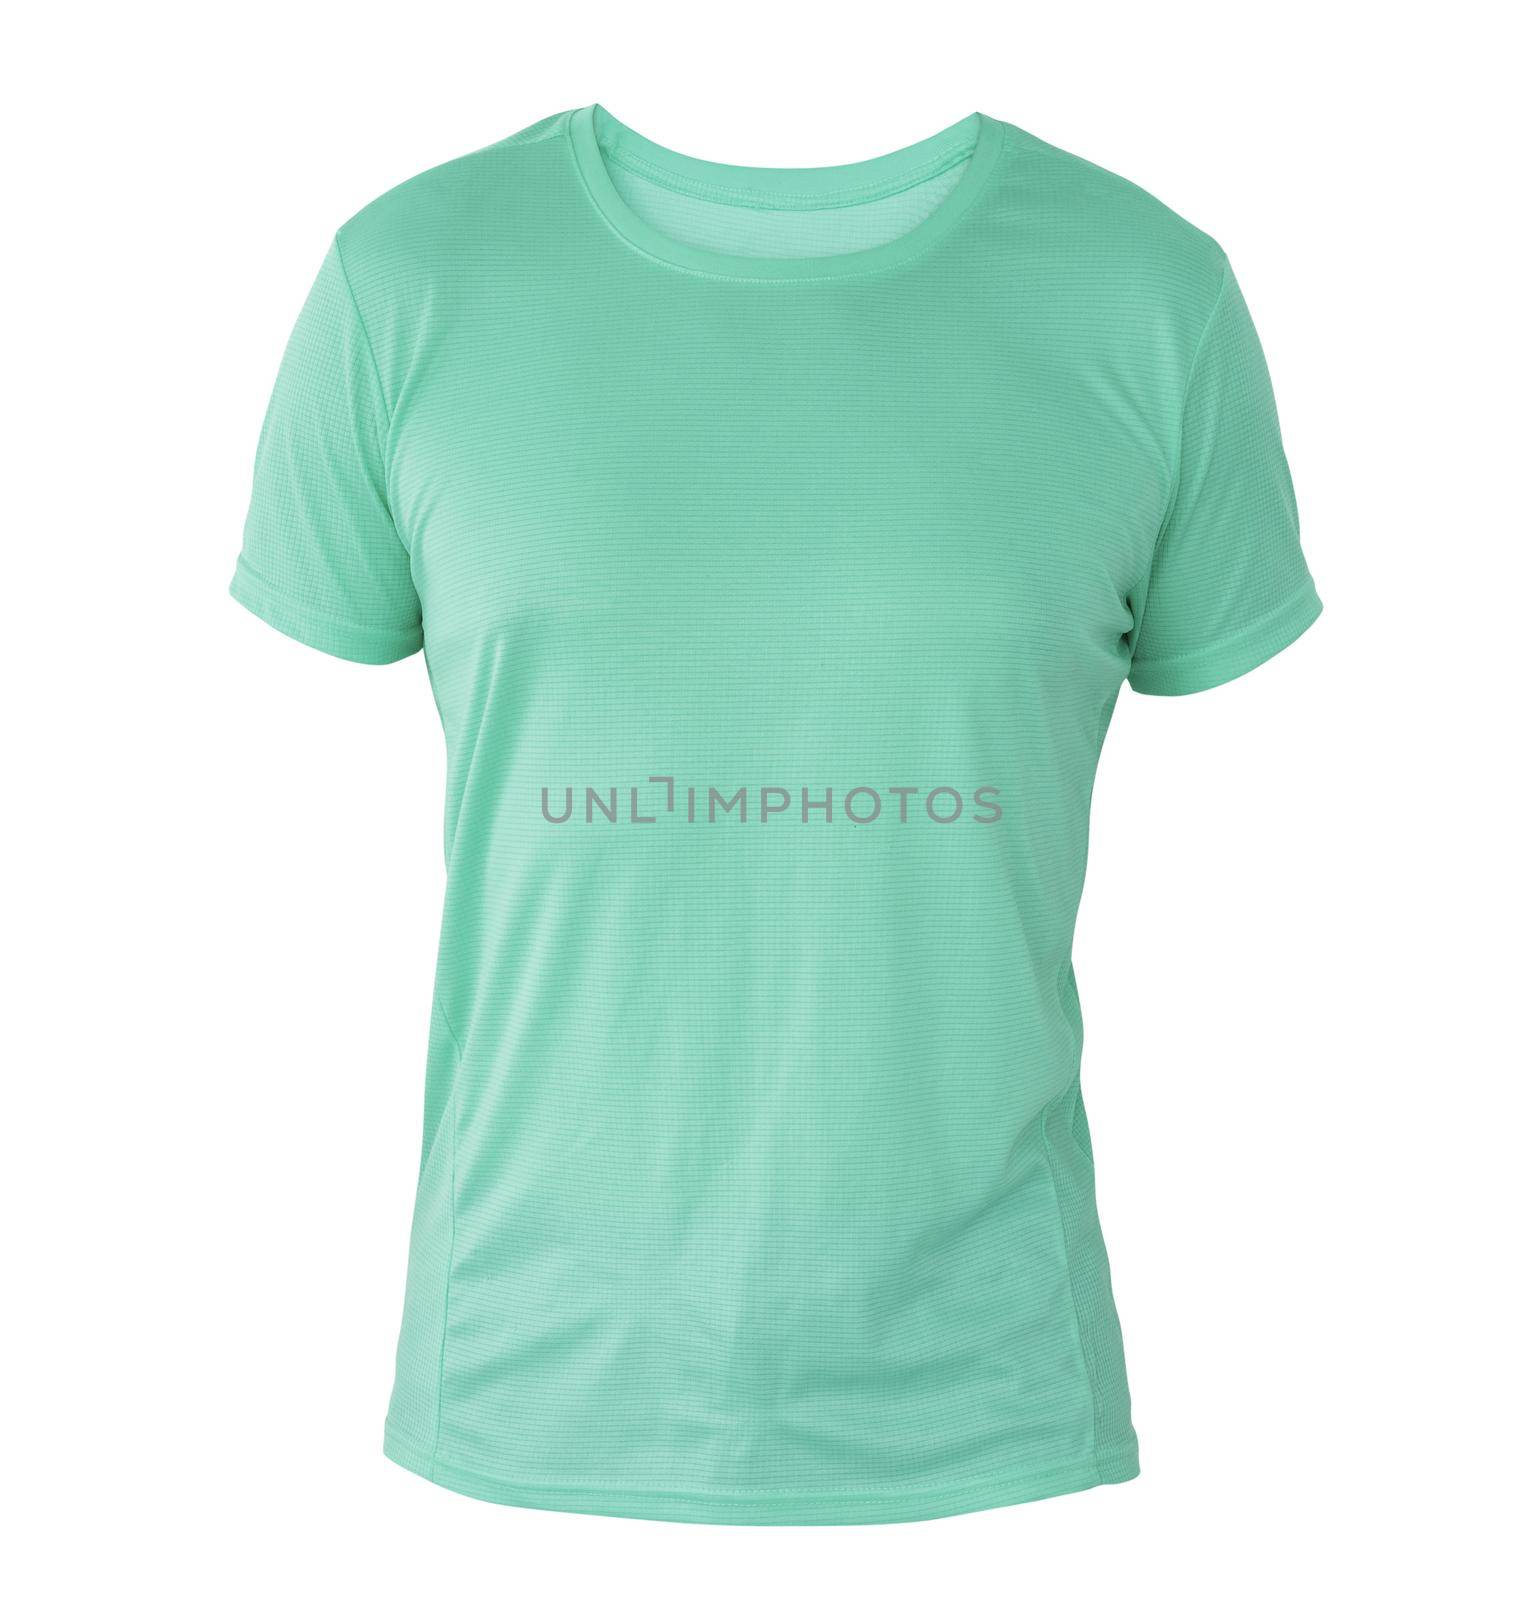 aquamarine t-shirt template on invisible mannequin isolated on a white background, for your design mockup